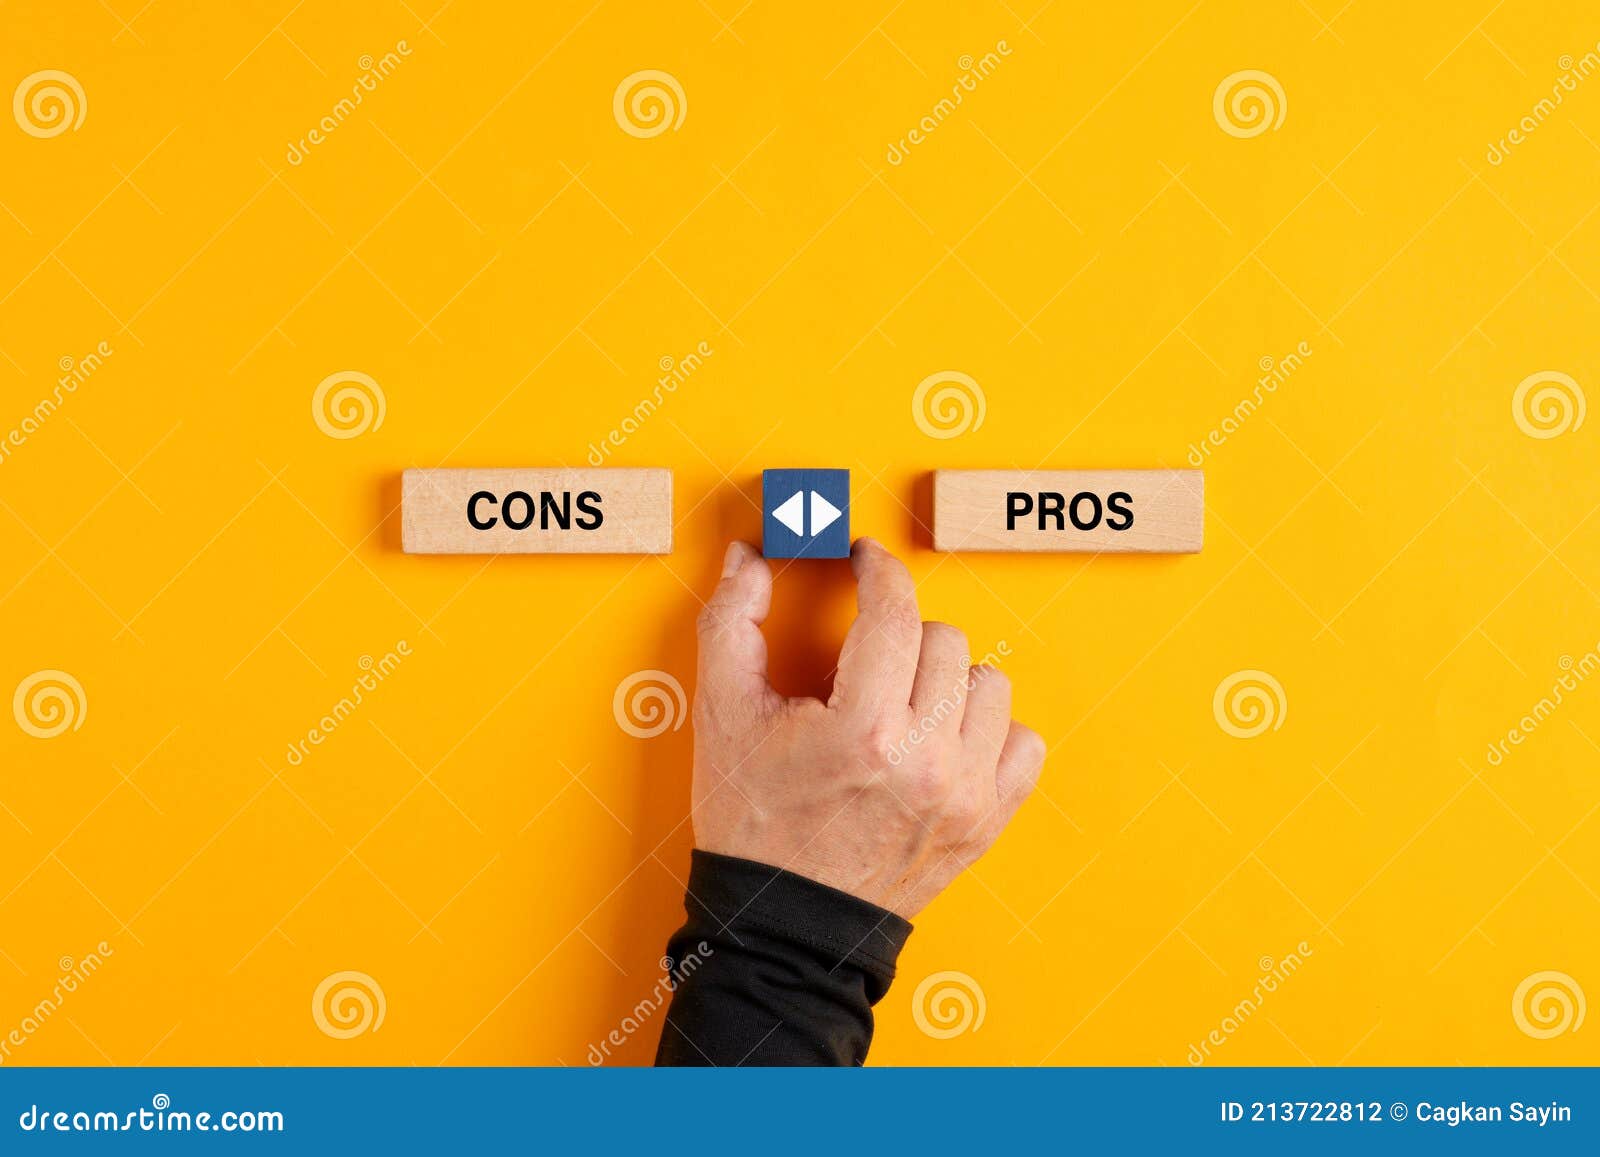 male hand holds a wooden cube with arrow icon is about to make a choice between pros and cons